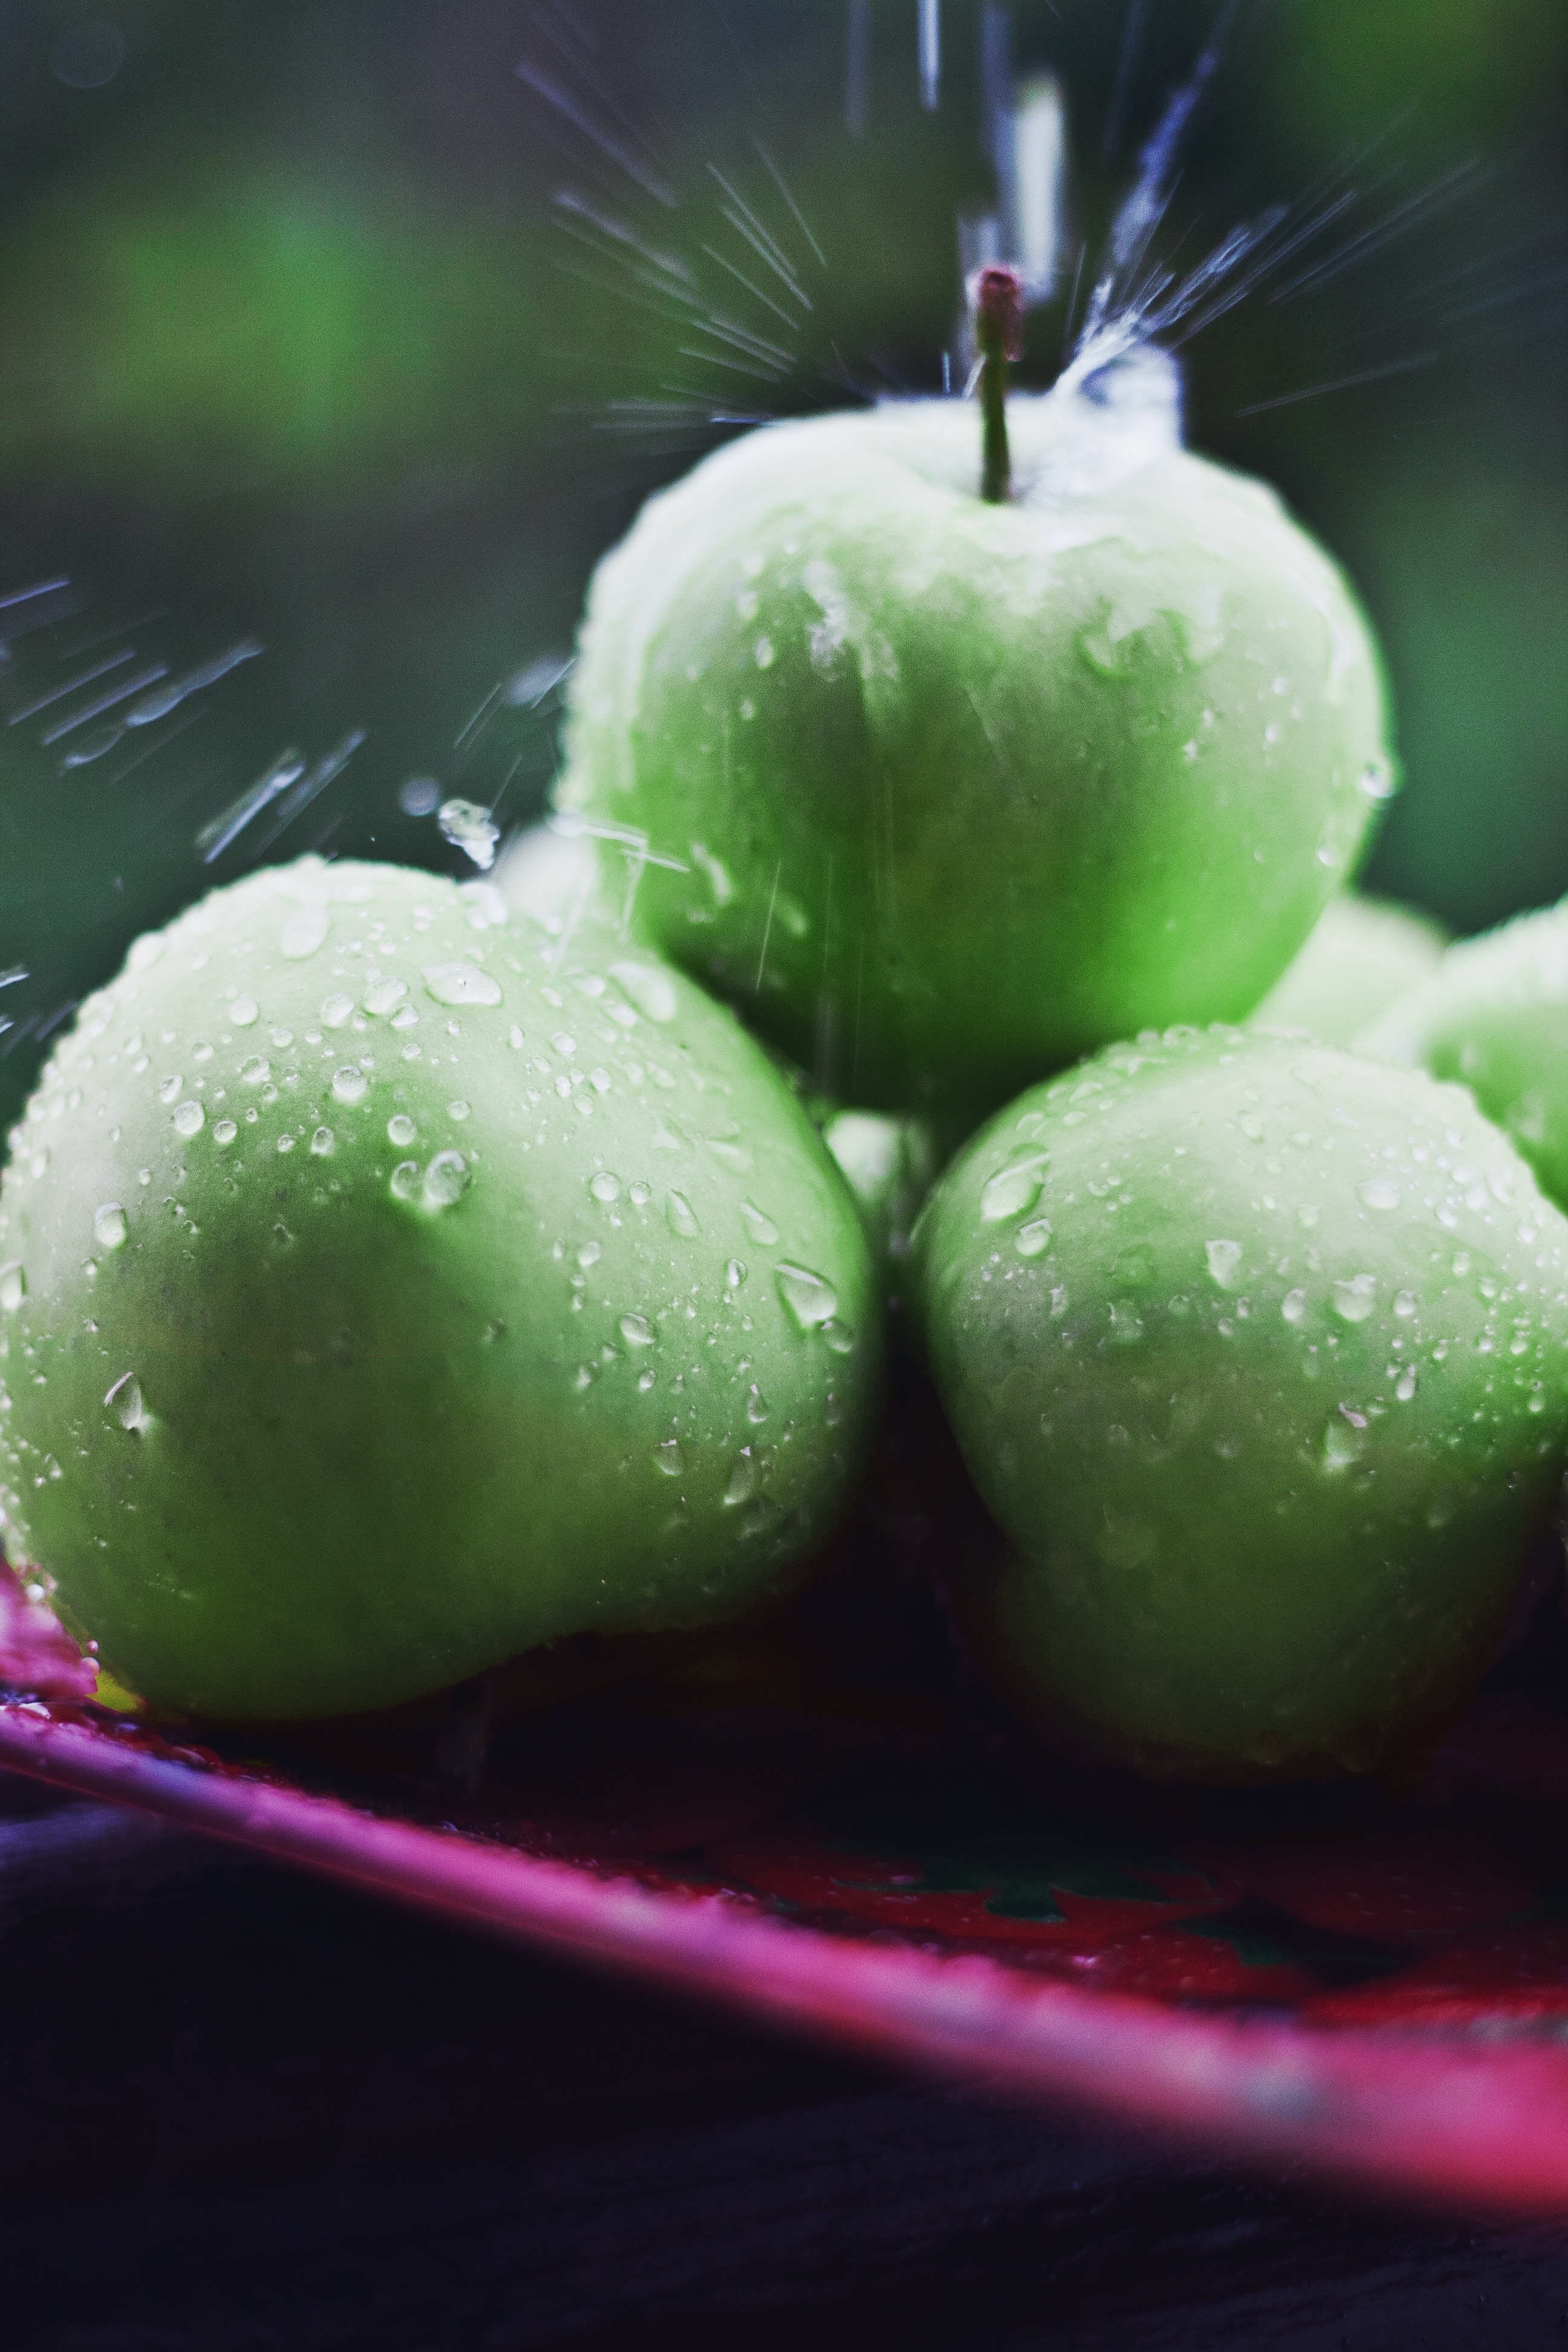 wet green apples on pink tray